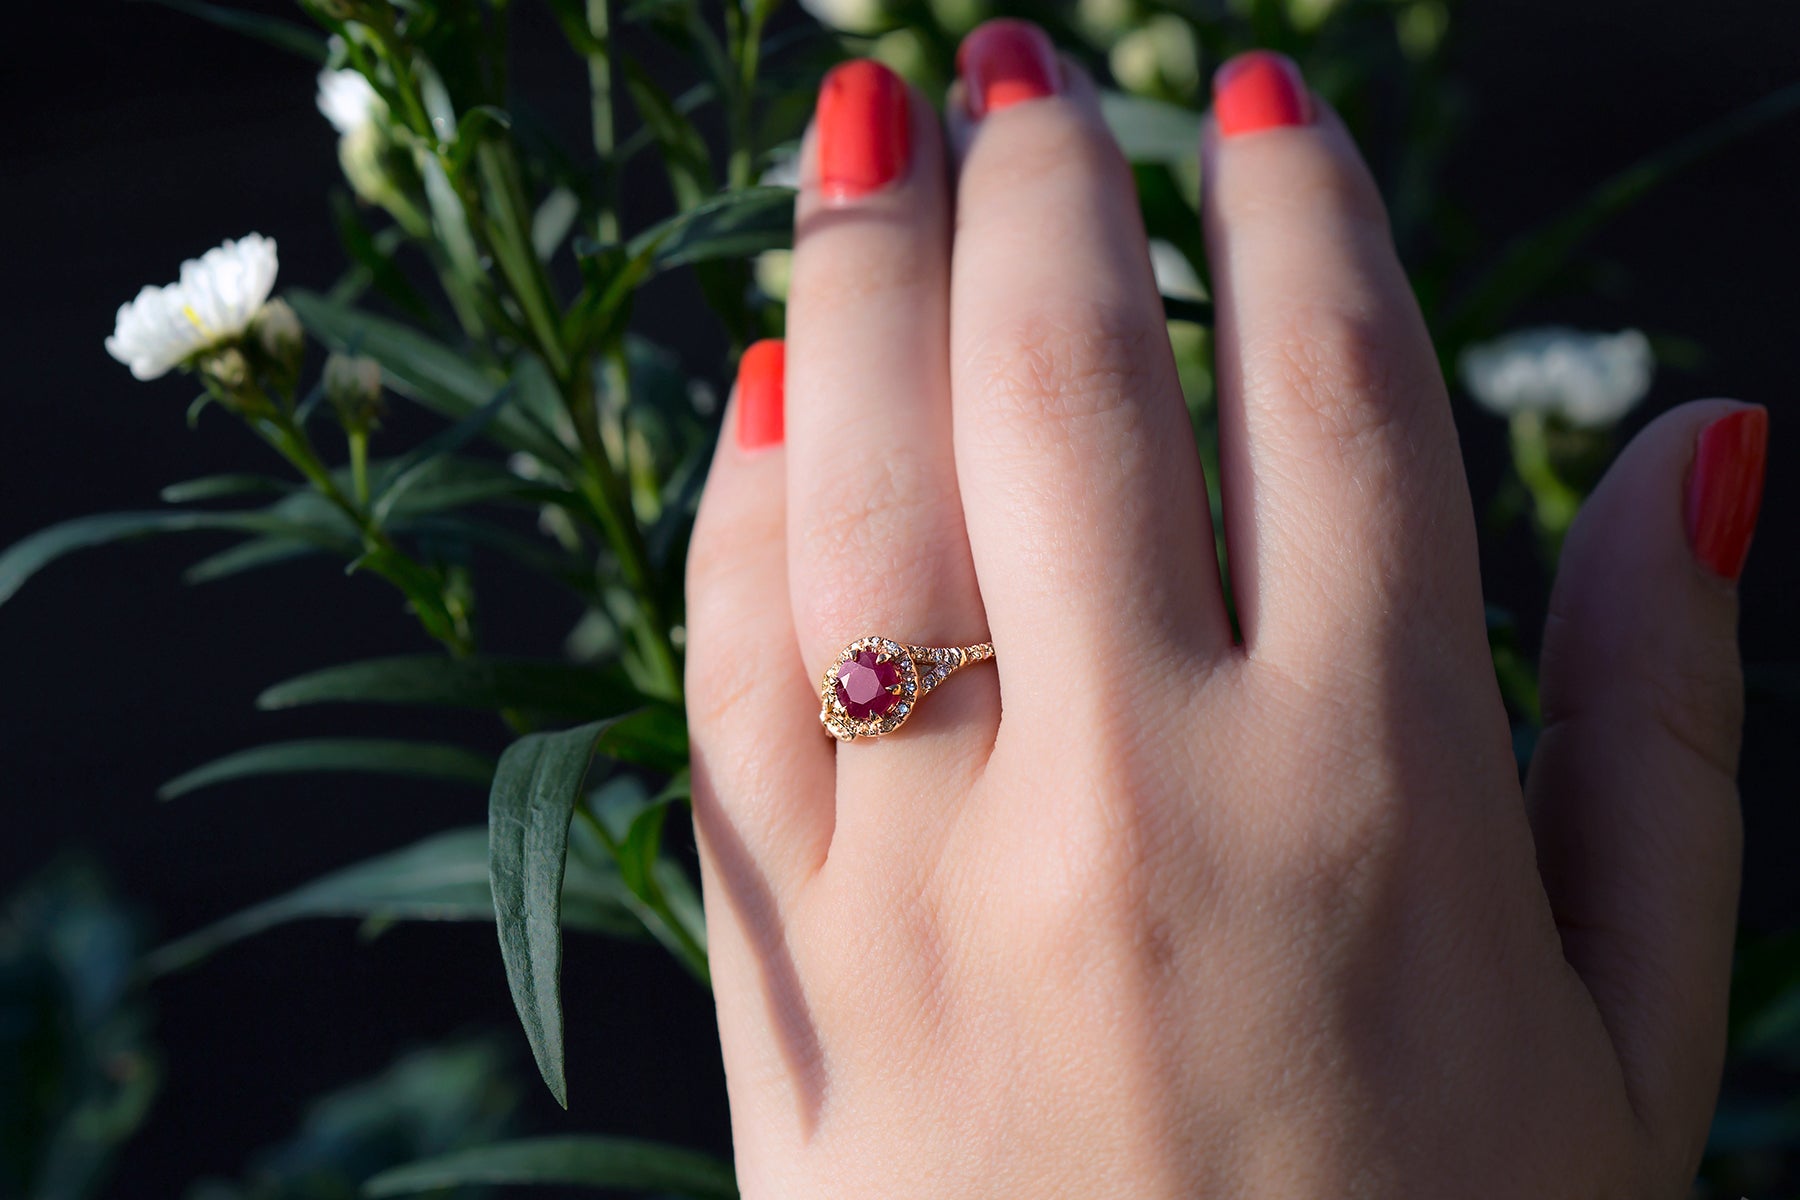 Wyoming All Natural Ruby Castilleja Ring - S. Kind & Co